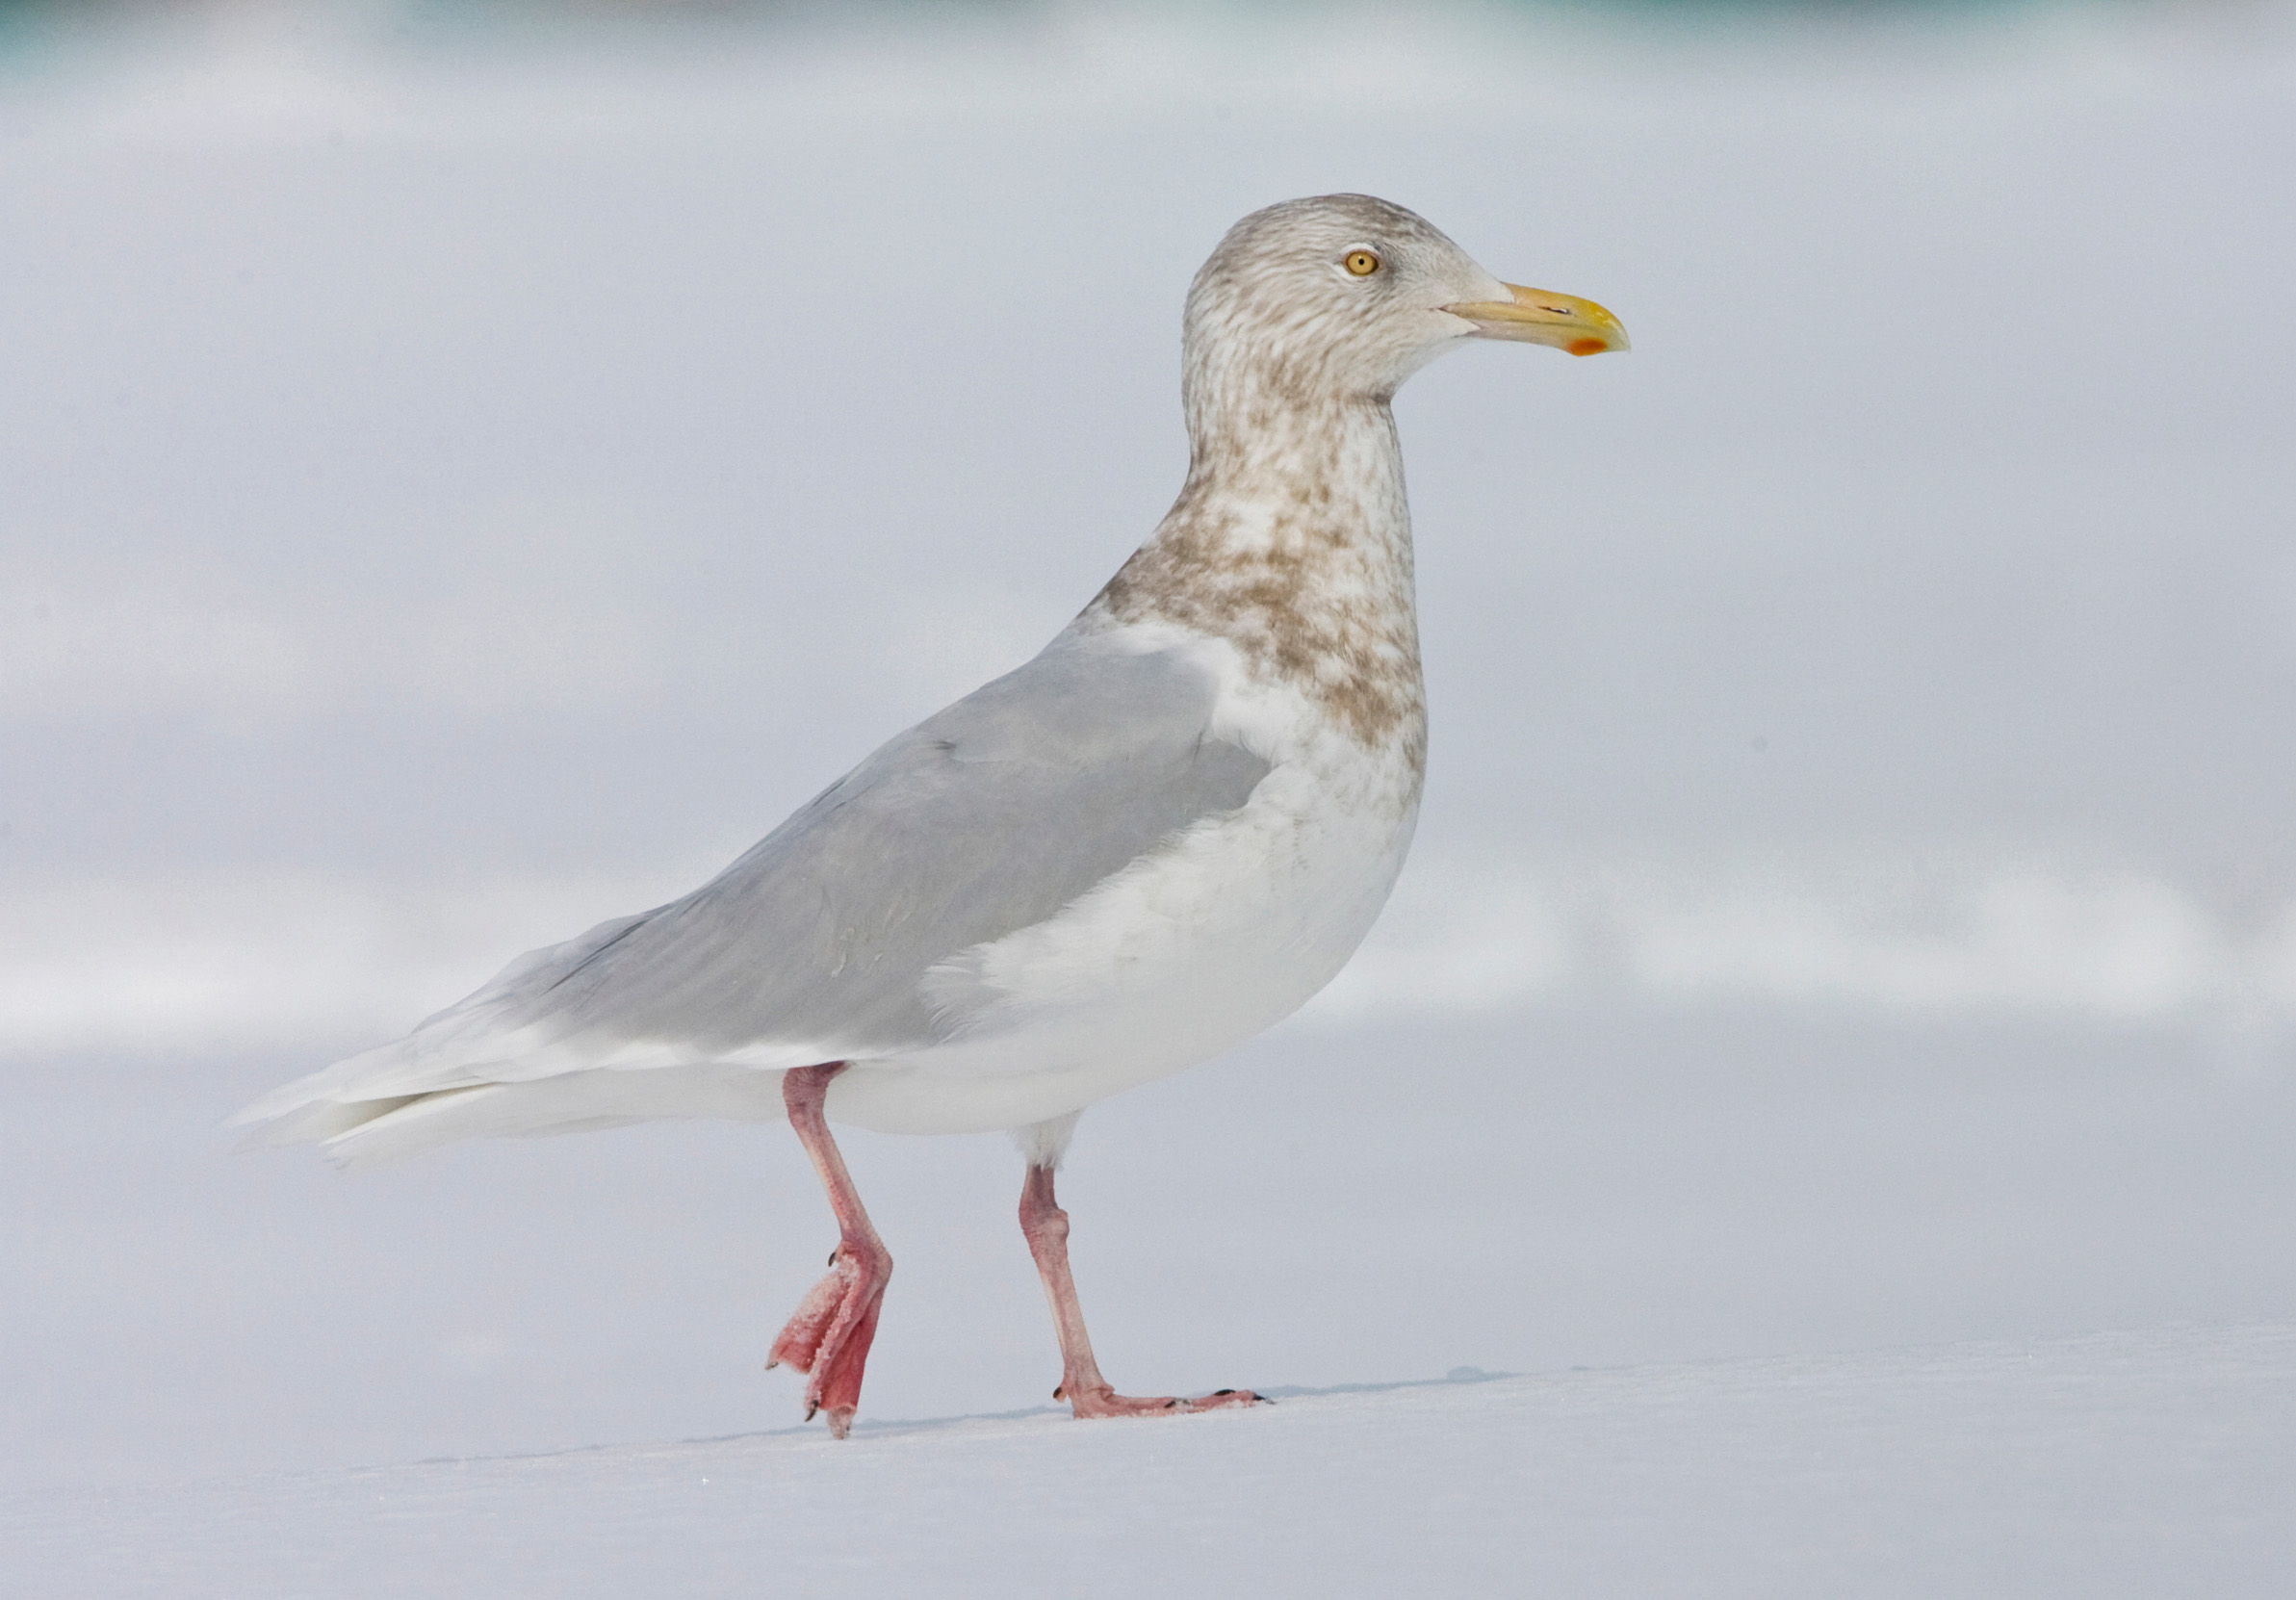 A wintering Glaucous Gull walking round in the snow.